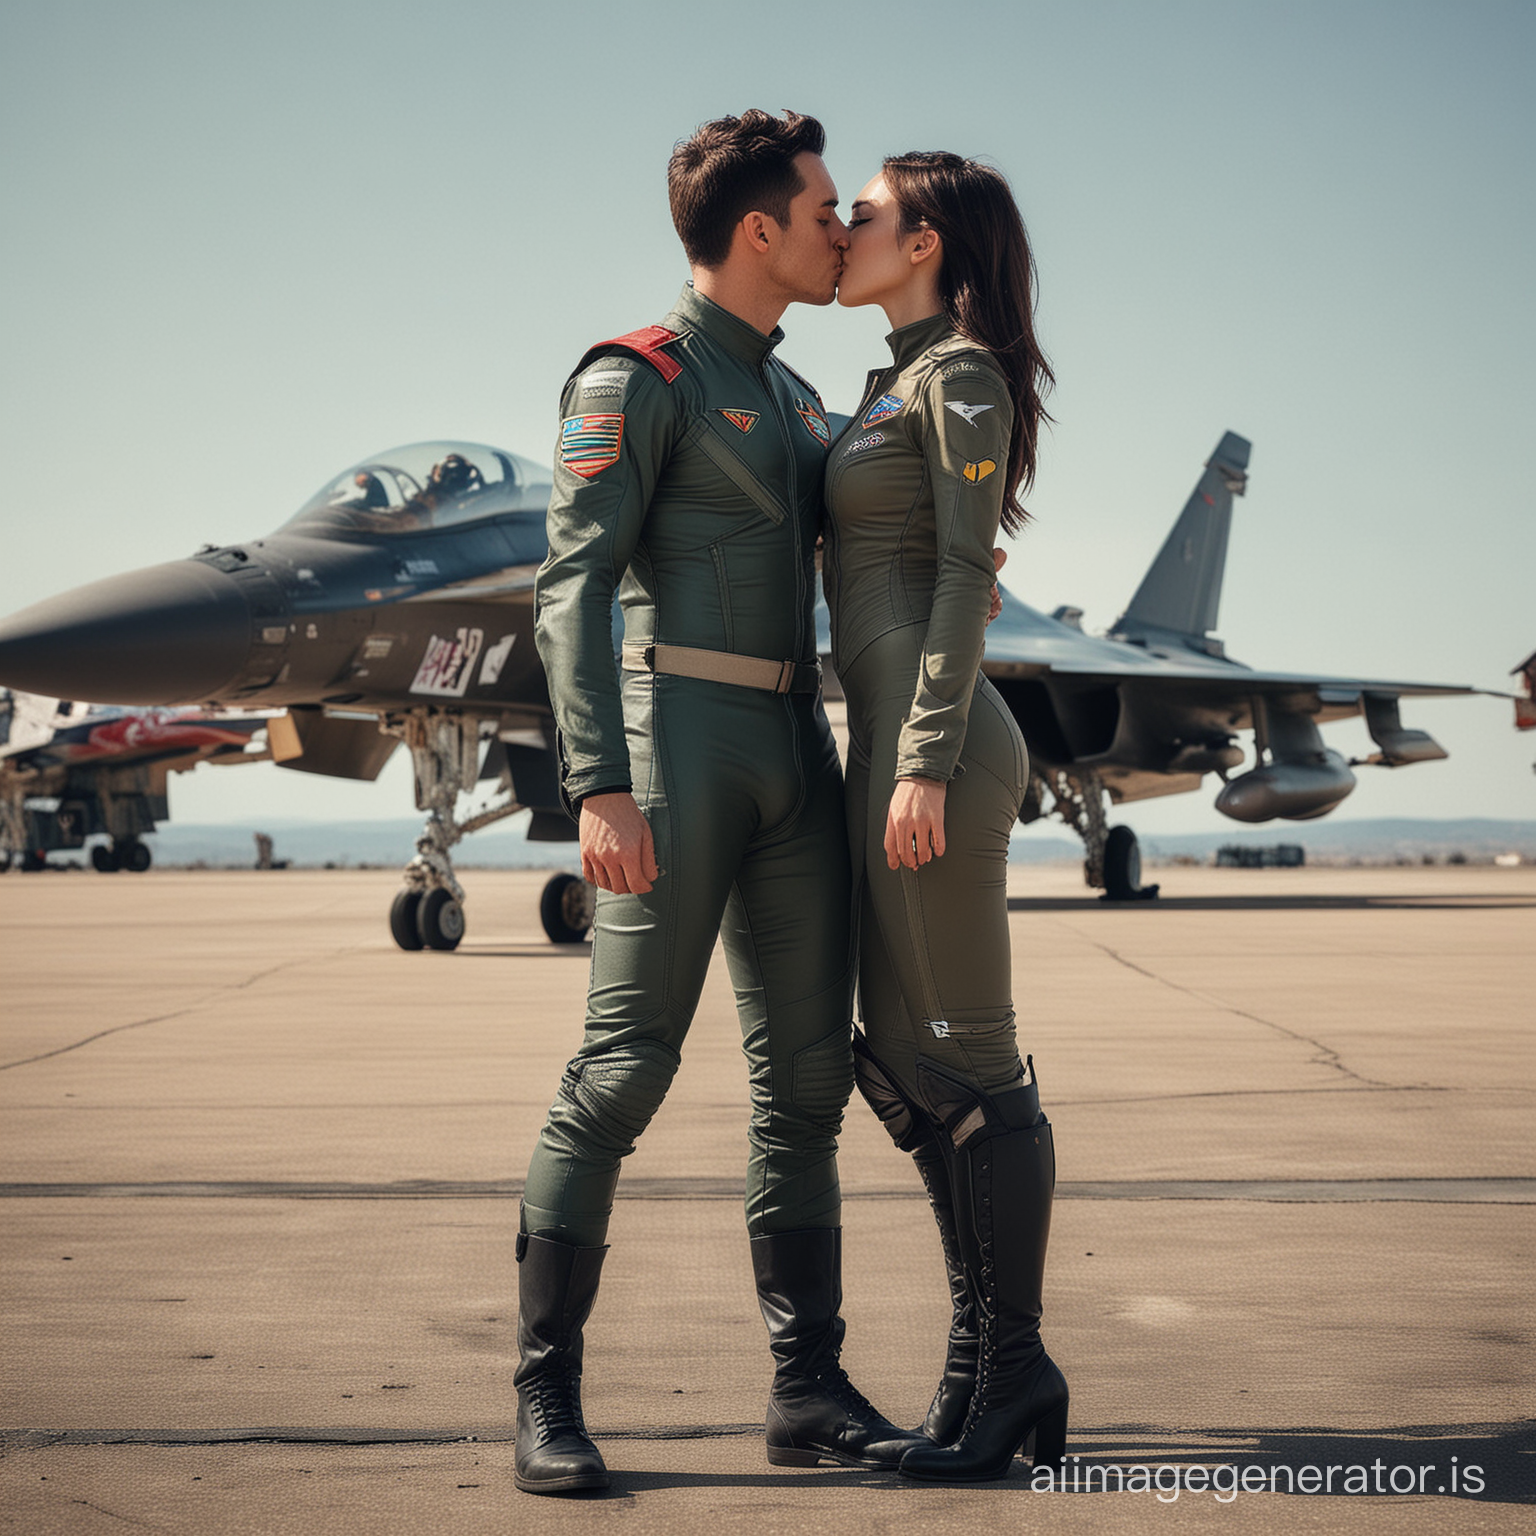 Men and women in torn clothes Half-naked kissing in front of a fighter jet, skintight fit, skintight suit, perfect military composure. Tight clothing Jet wings on the back alena aenami and lilia alvarado fighter jets, very perfect position jet fighter Airplane wings on the back, thick thighs, two pairs of wings, wearing a military uniform.